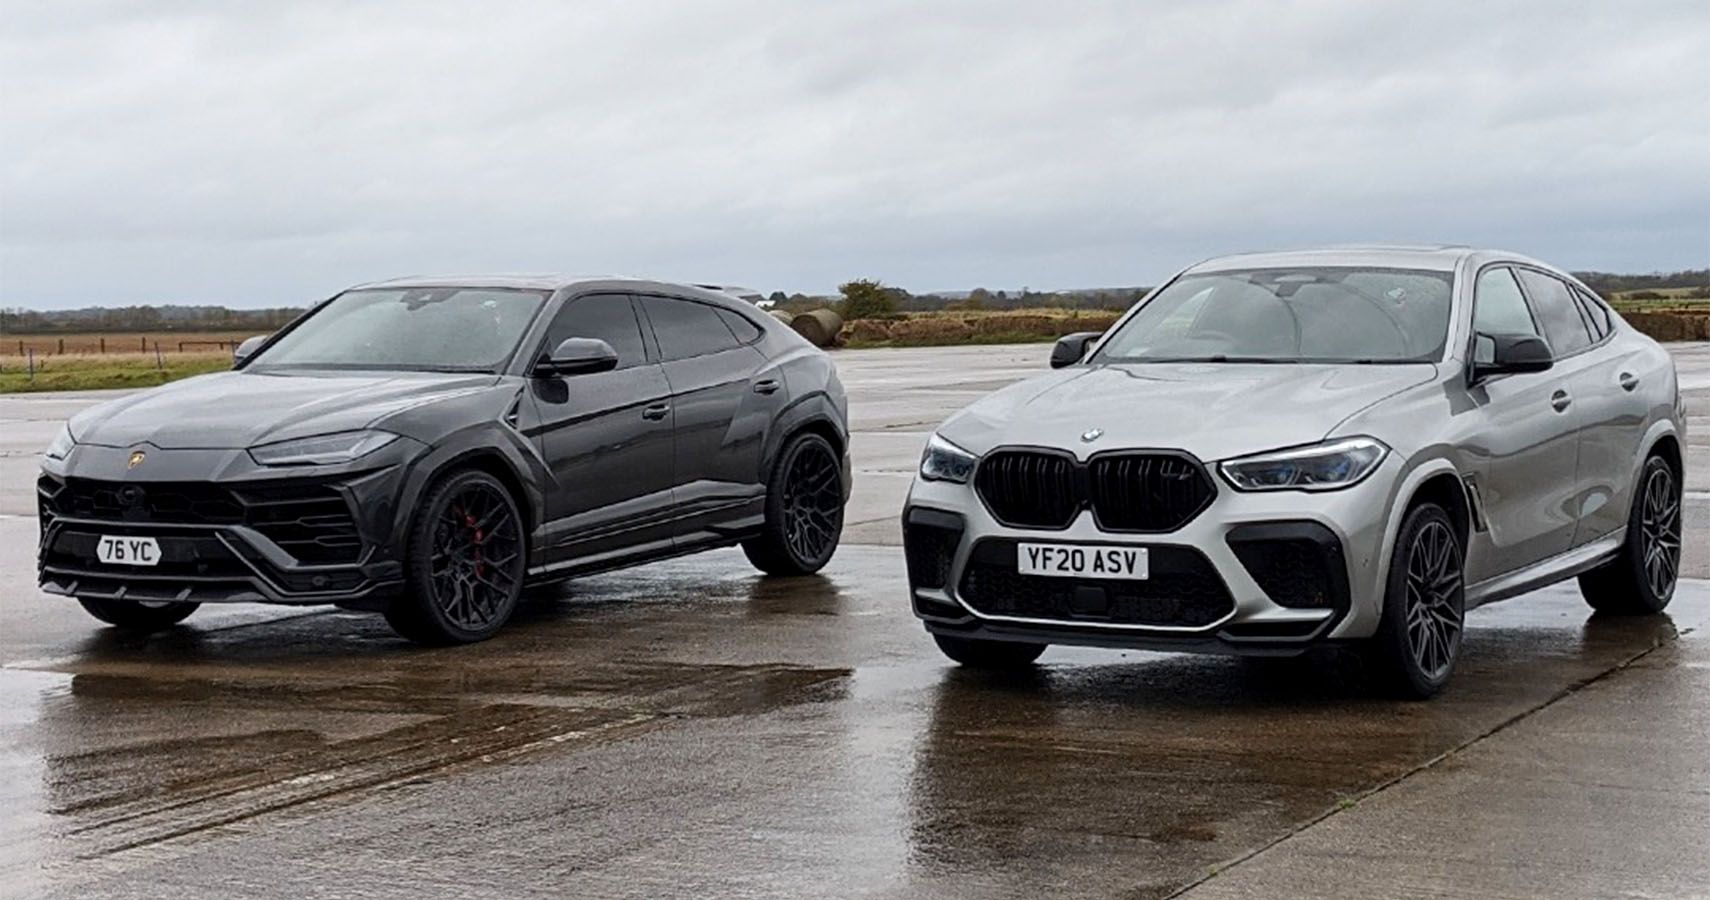 Watch A Lambo Urus Drag Race A BMW X6M Competition On A Wet Airstrip